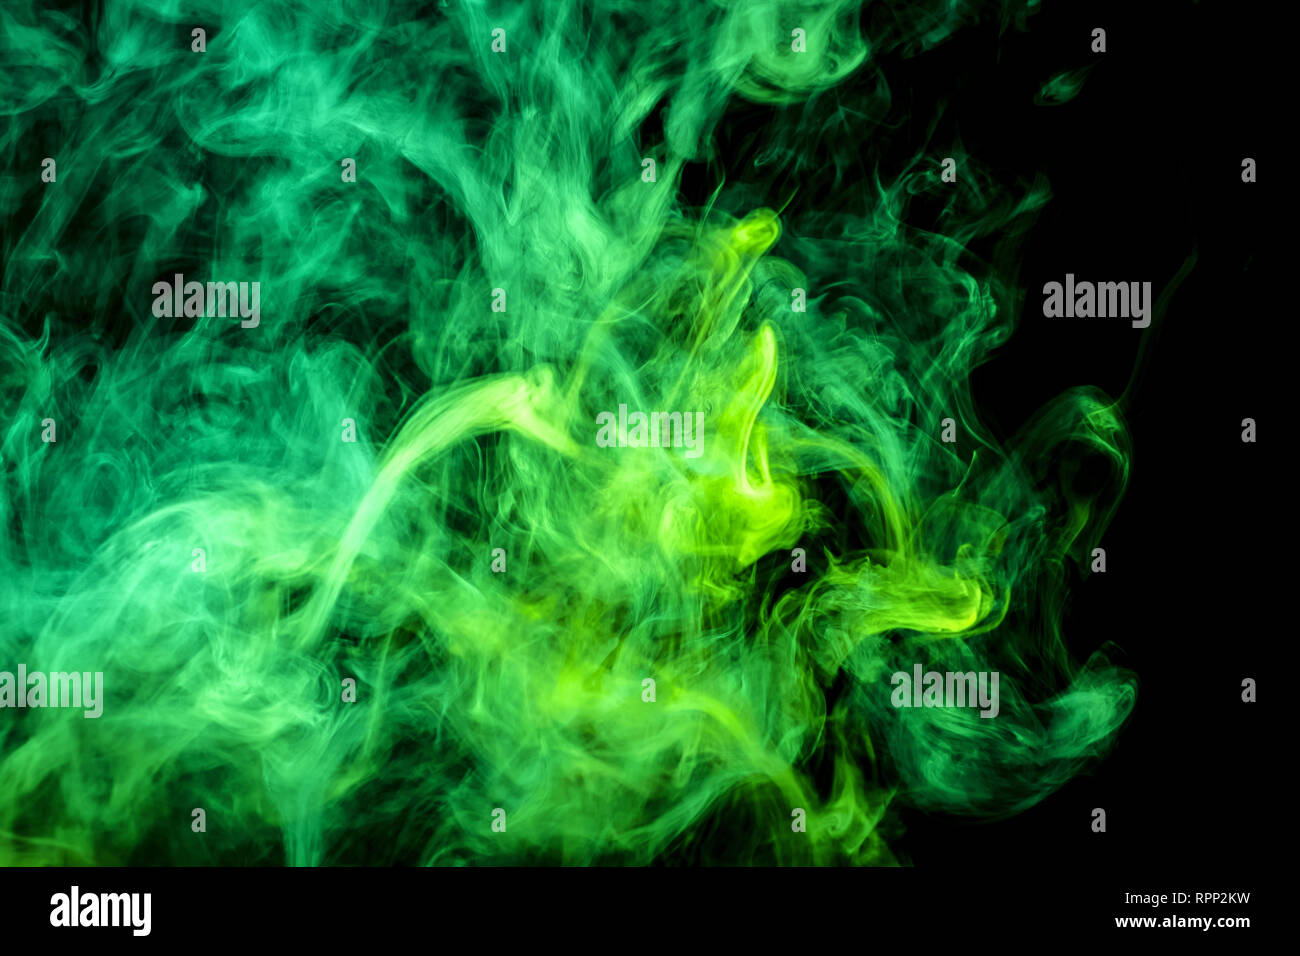 Thick Colorful Green Smoke In The Form Of A Skull Monster Dragon On A Black Isolated Background Background From The Smoke Of Vape Mocap For Cool T Stock Photo Alamy